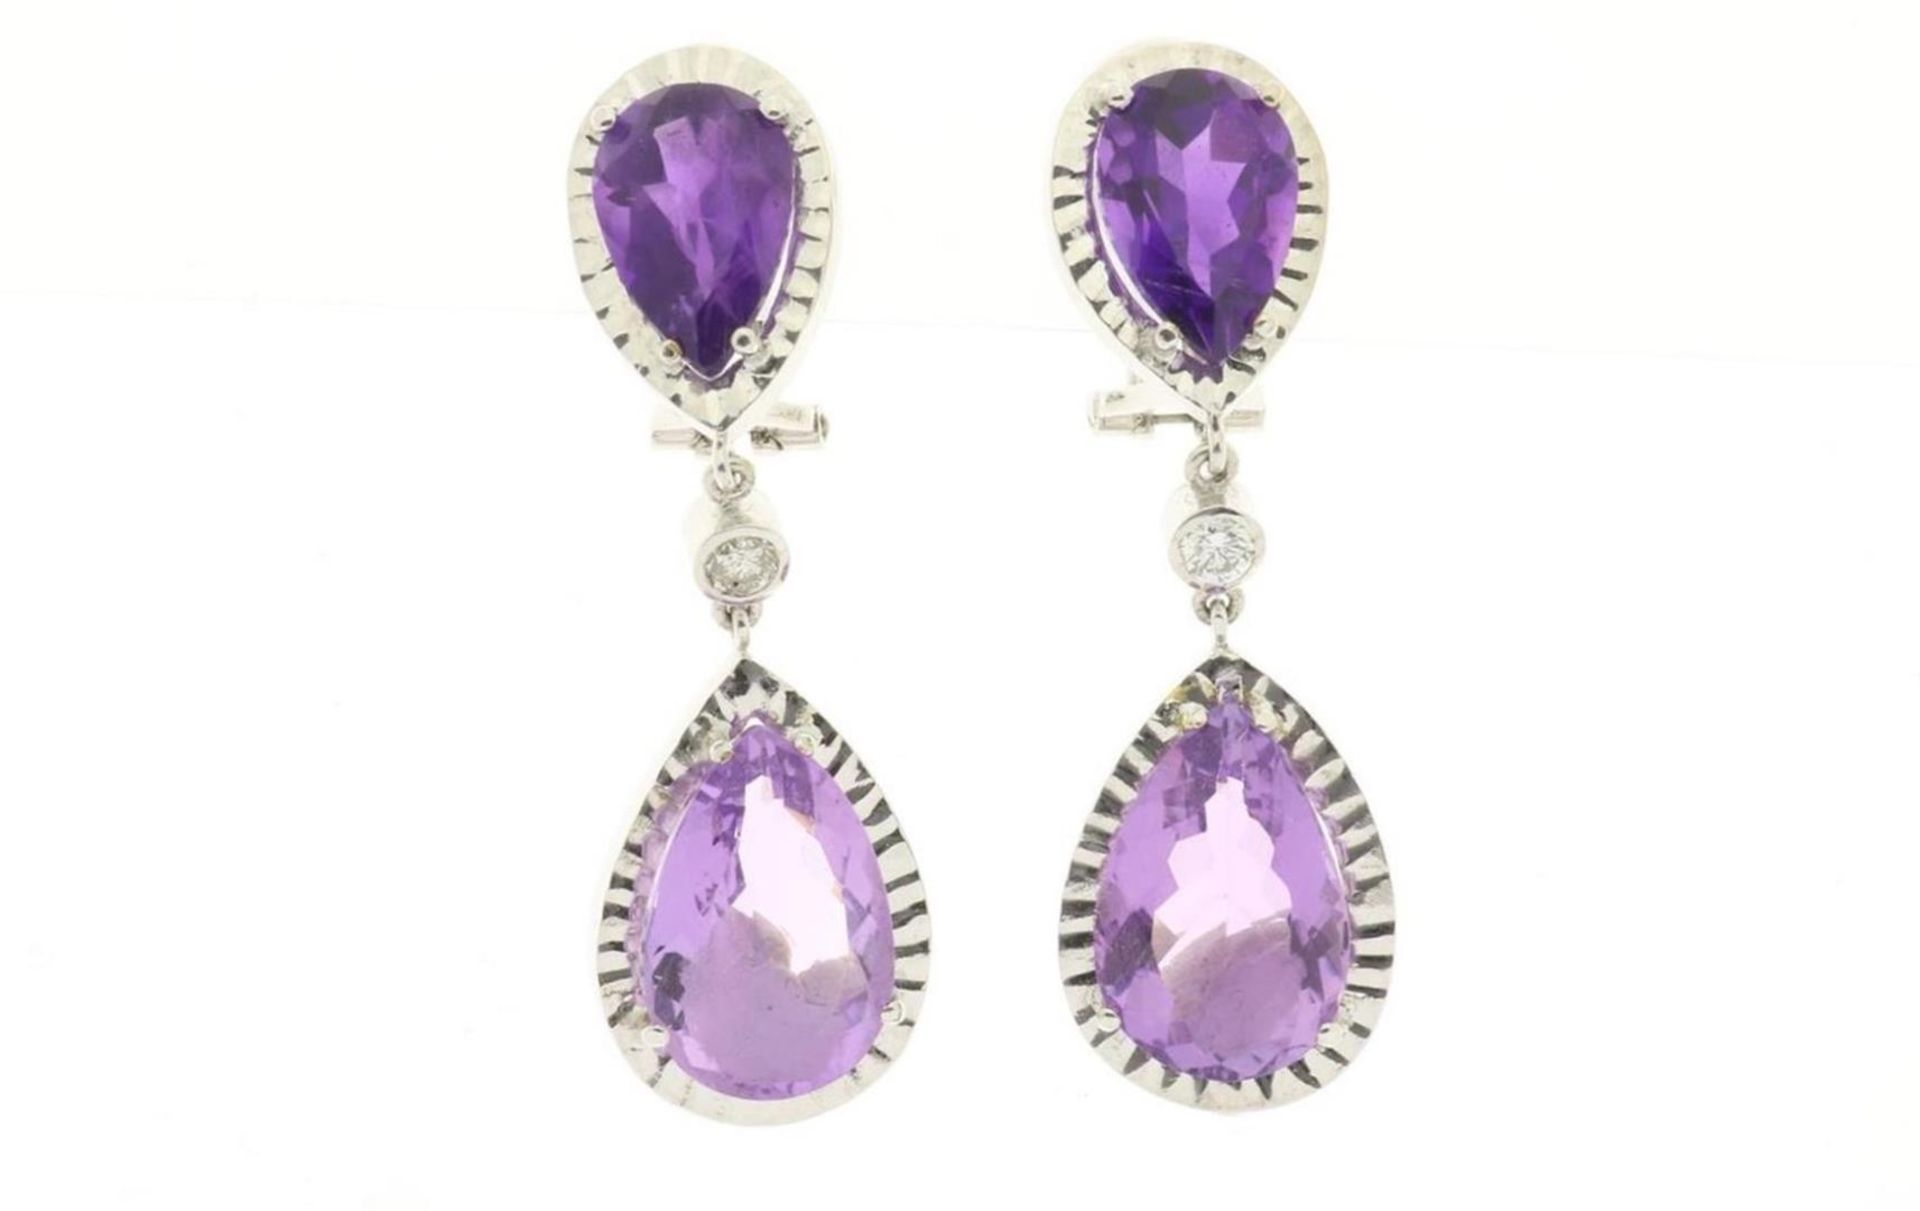 White gold earrings with amethyst and diamond